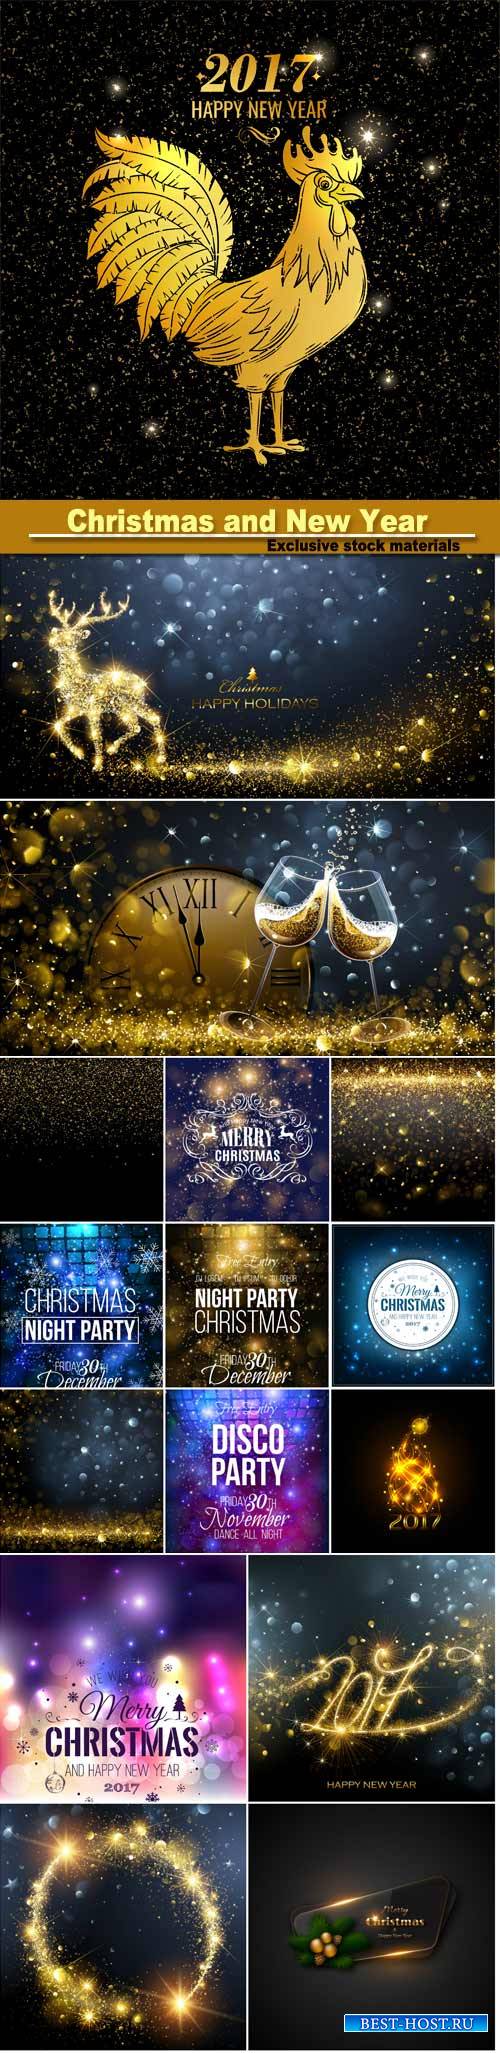 Christmas and New Year background with snowflakes, light, stars, vector ill ...